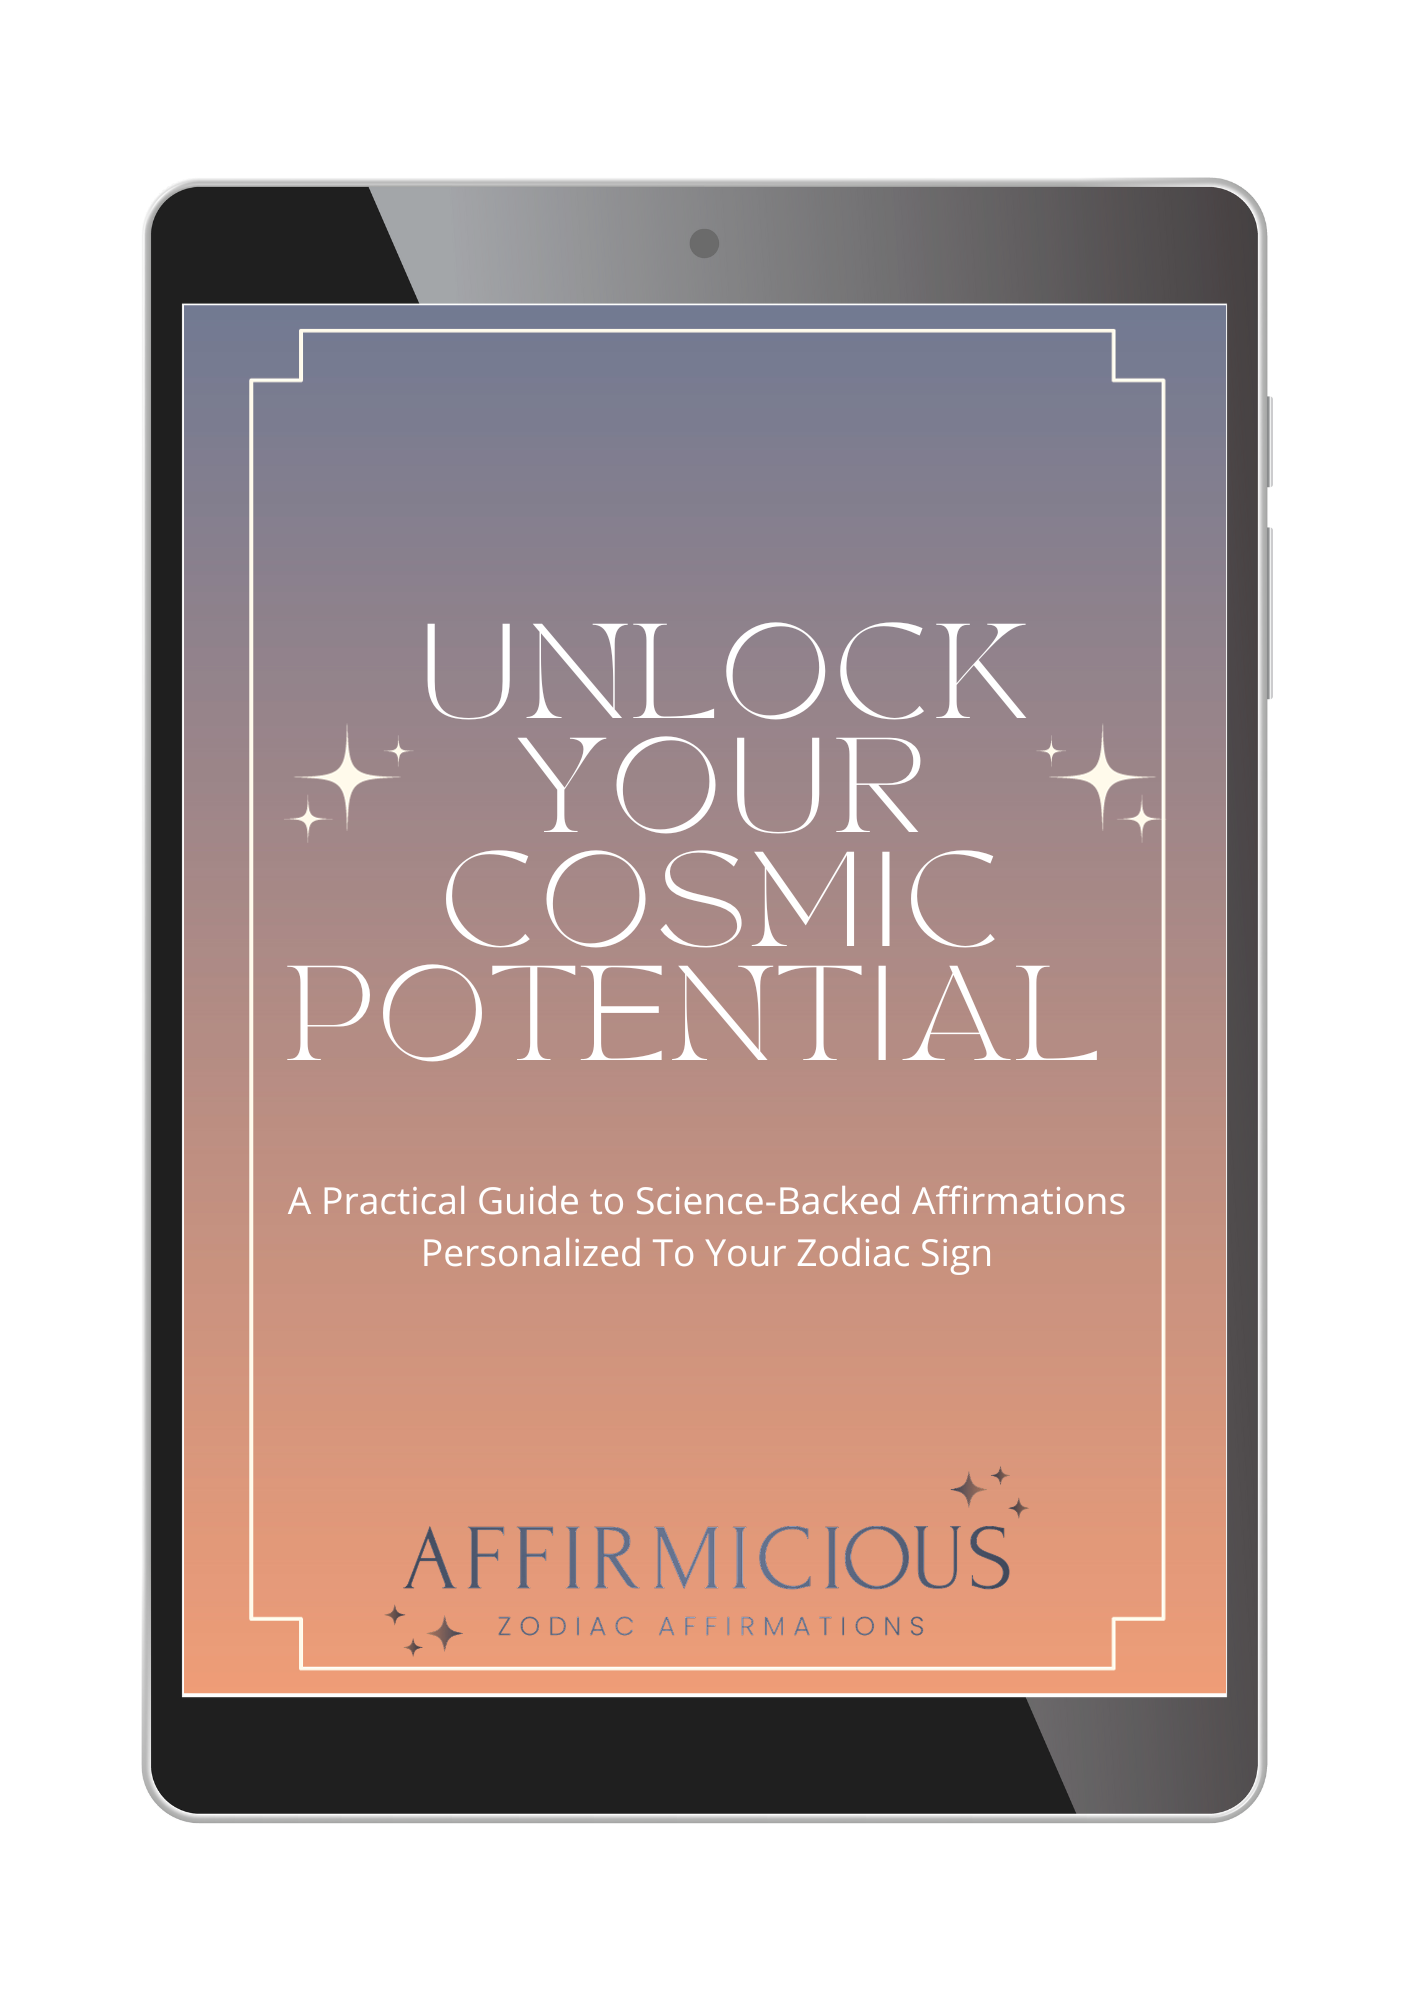 Ebook: Unlock Your Cosmic Potential: A Practical Guide to Science-Backed Affirmations (That Actually Work!) Personalized To Your Zodiac Sign - Affirmicious